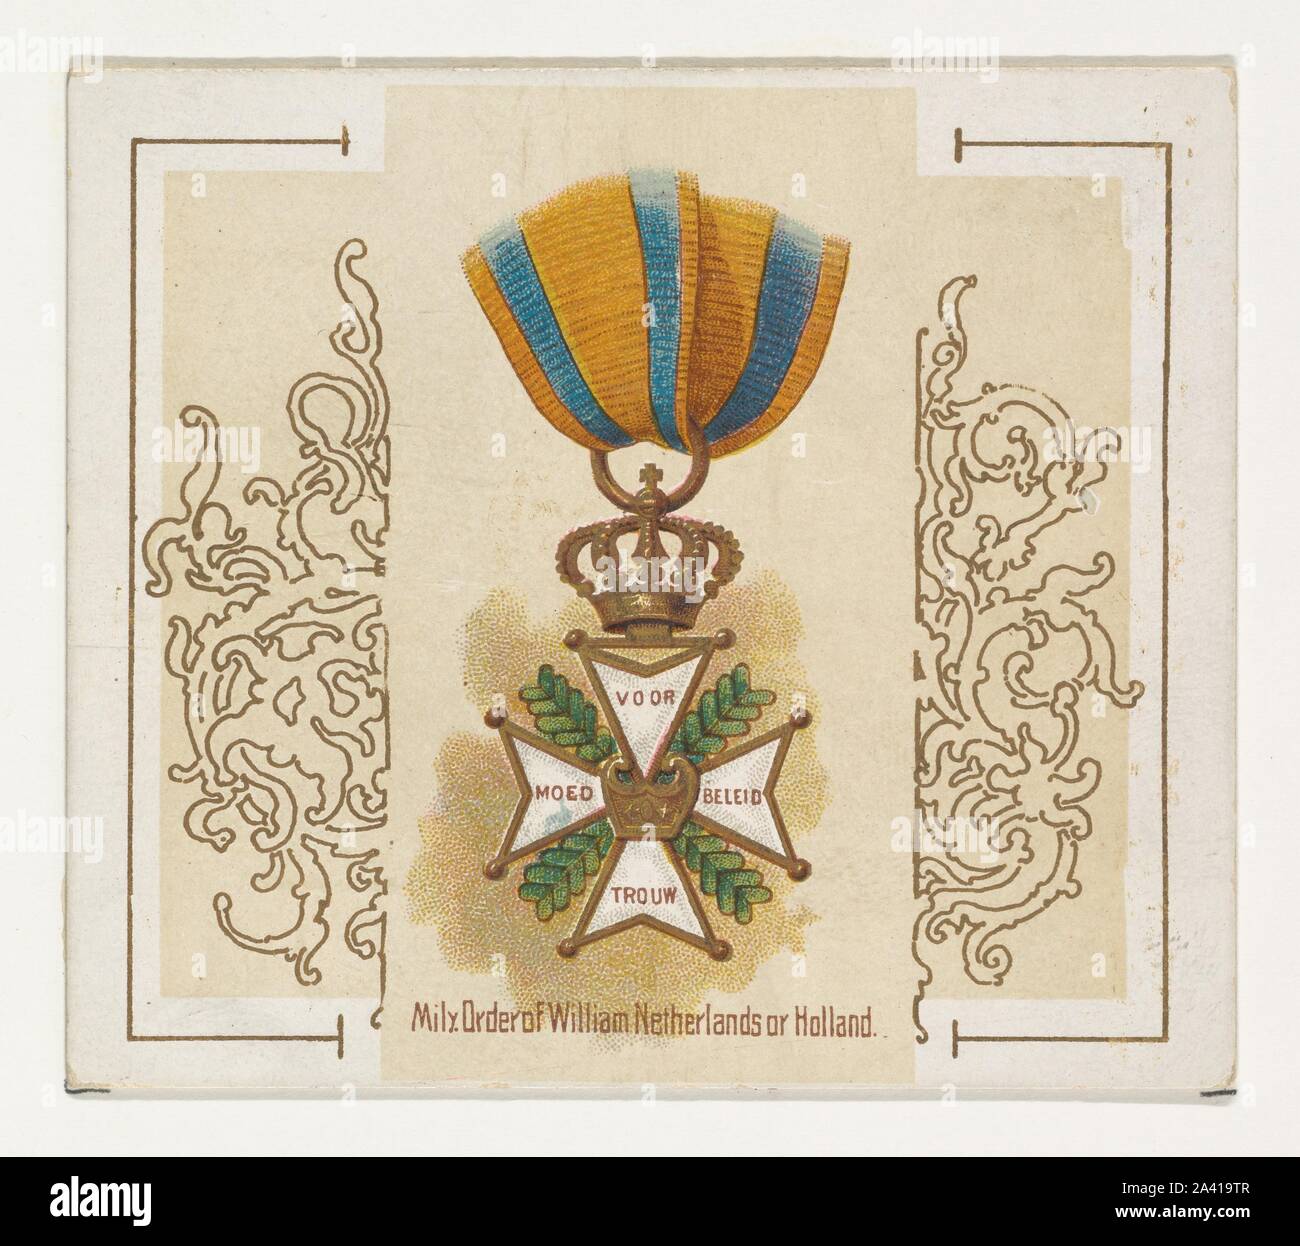 Military Order of William, Netherlands or Holland, from the World's Decorations series (N44) for Allen & Ginter Ciga.jpg - 2A419TR Stock Photo